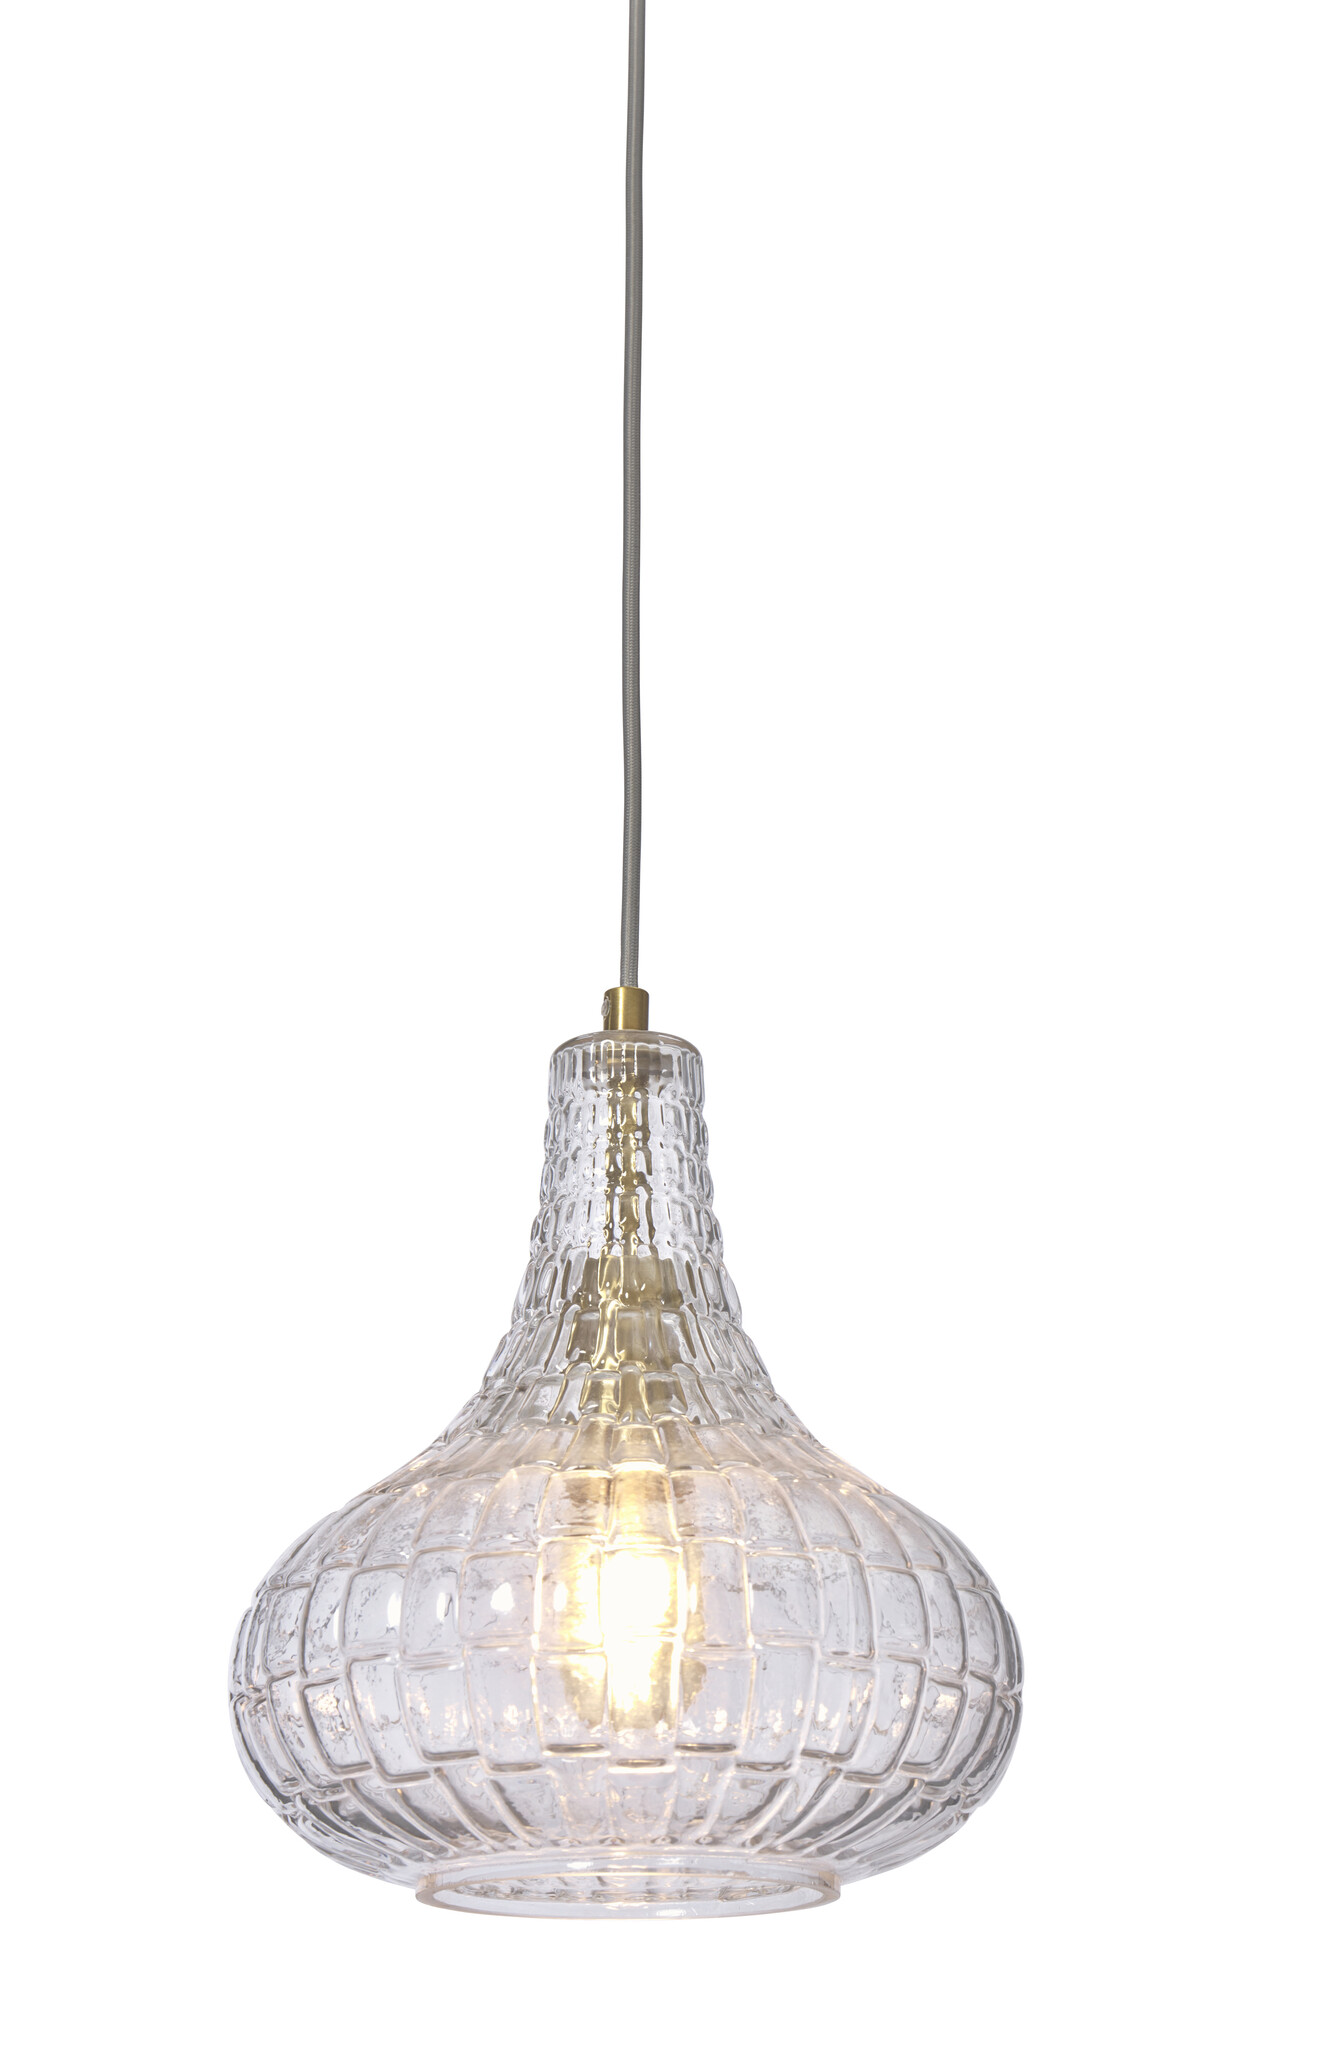 it's about RoMi-collectie Hanglamp glas Venice druppel, transp.